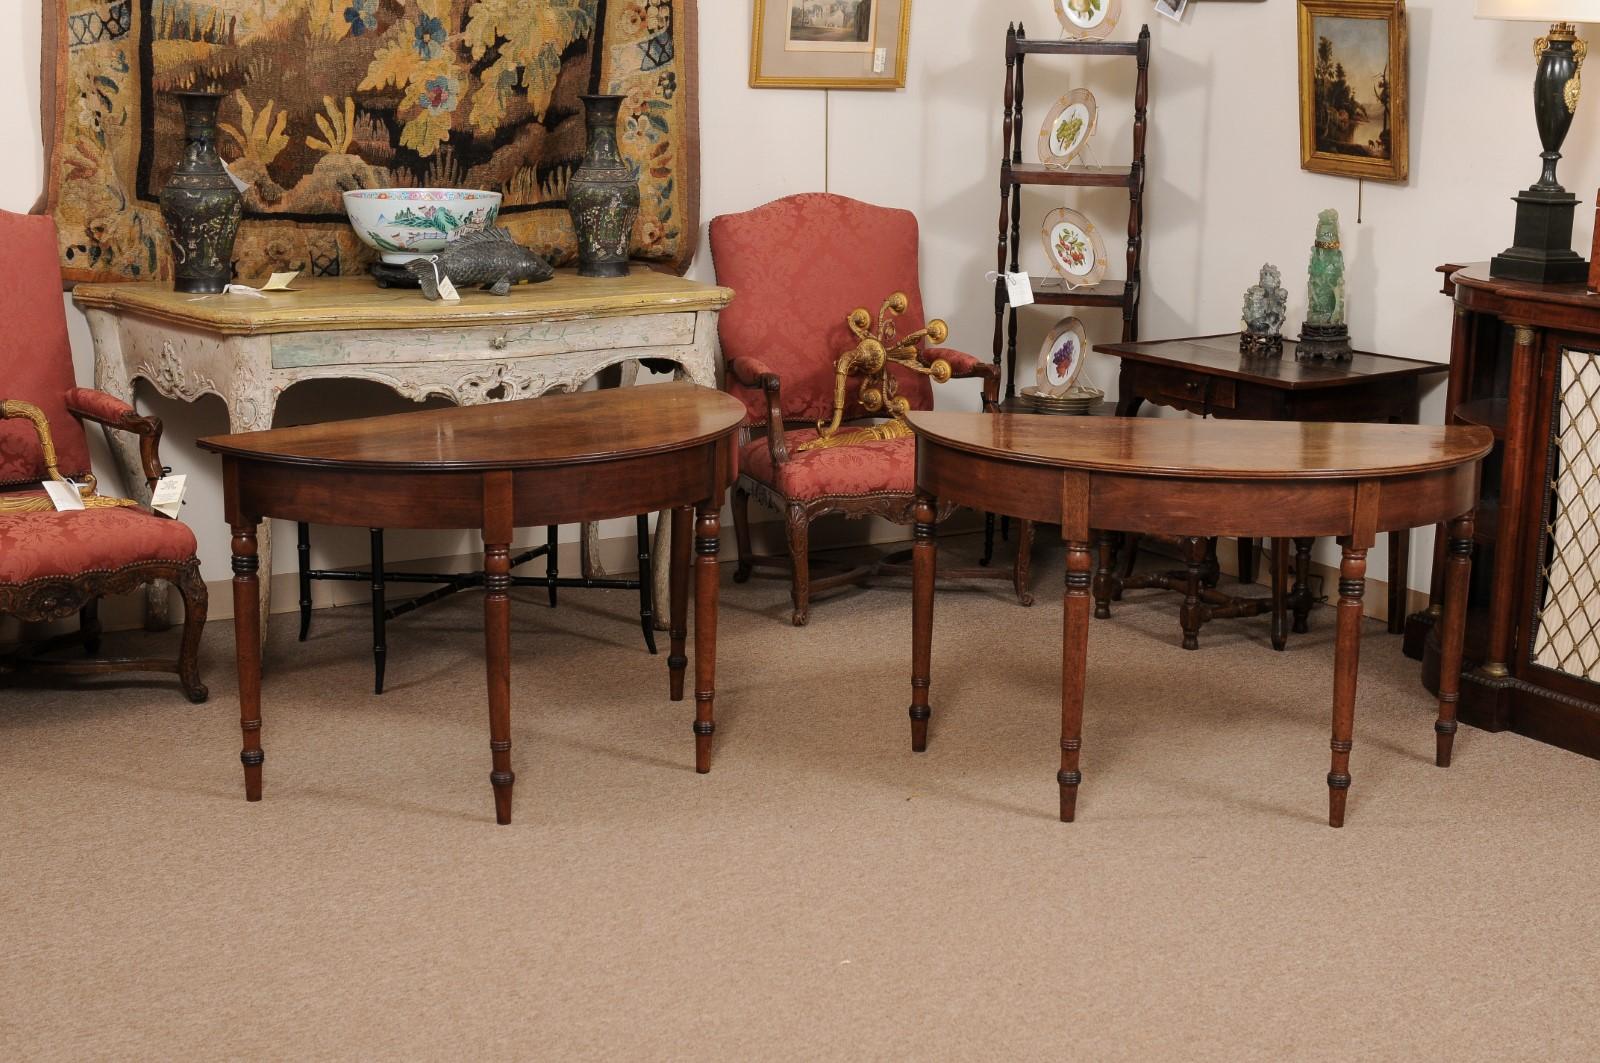  Pair of English Mahogany Demilune Console Tables with Turned Legs For Sale 4